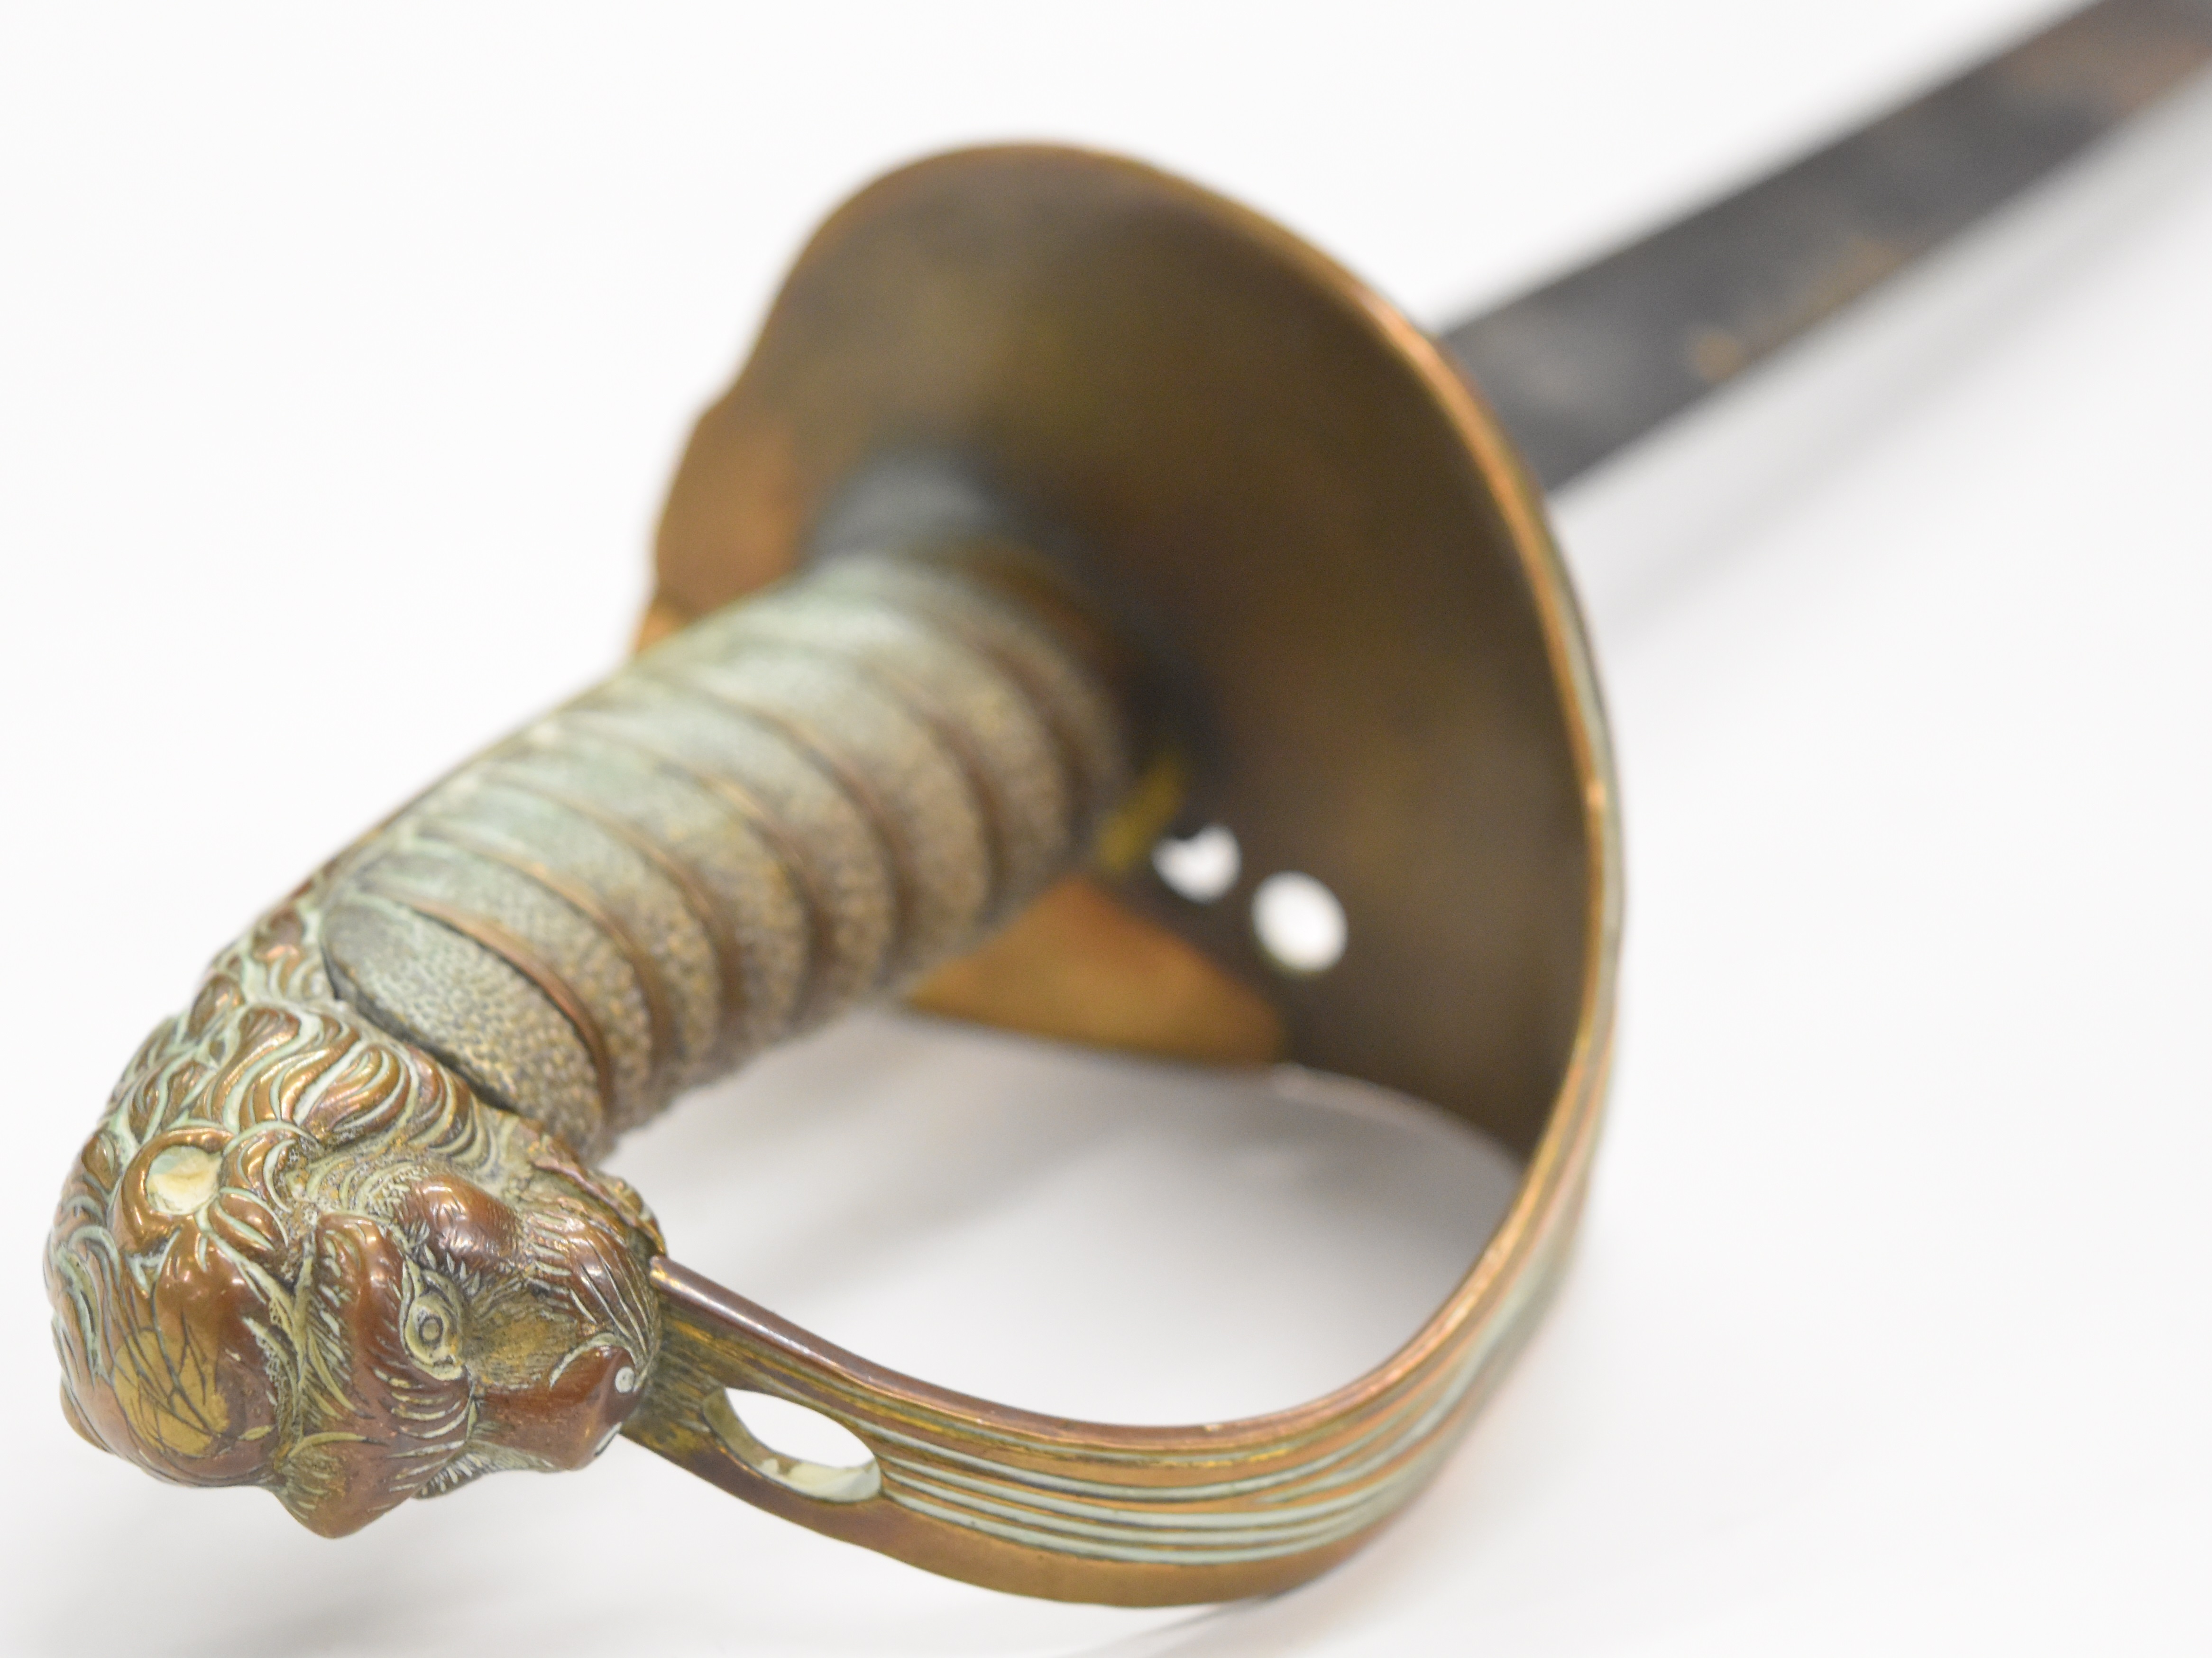 Royal Navy 1827 pattern sword with lion head pommel, folding inner guard and fouled anchor motif, - Image 5 of 11